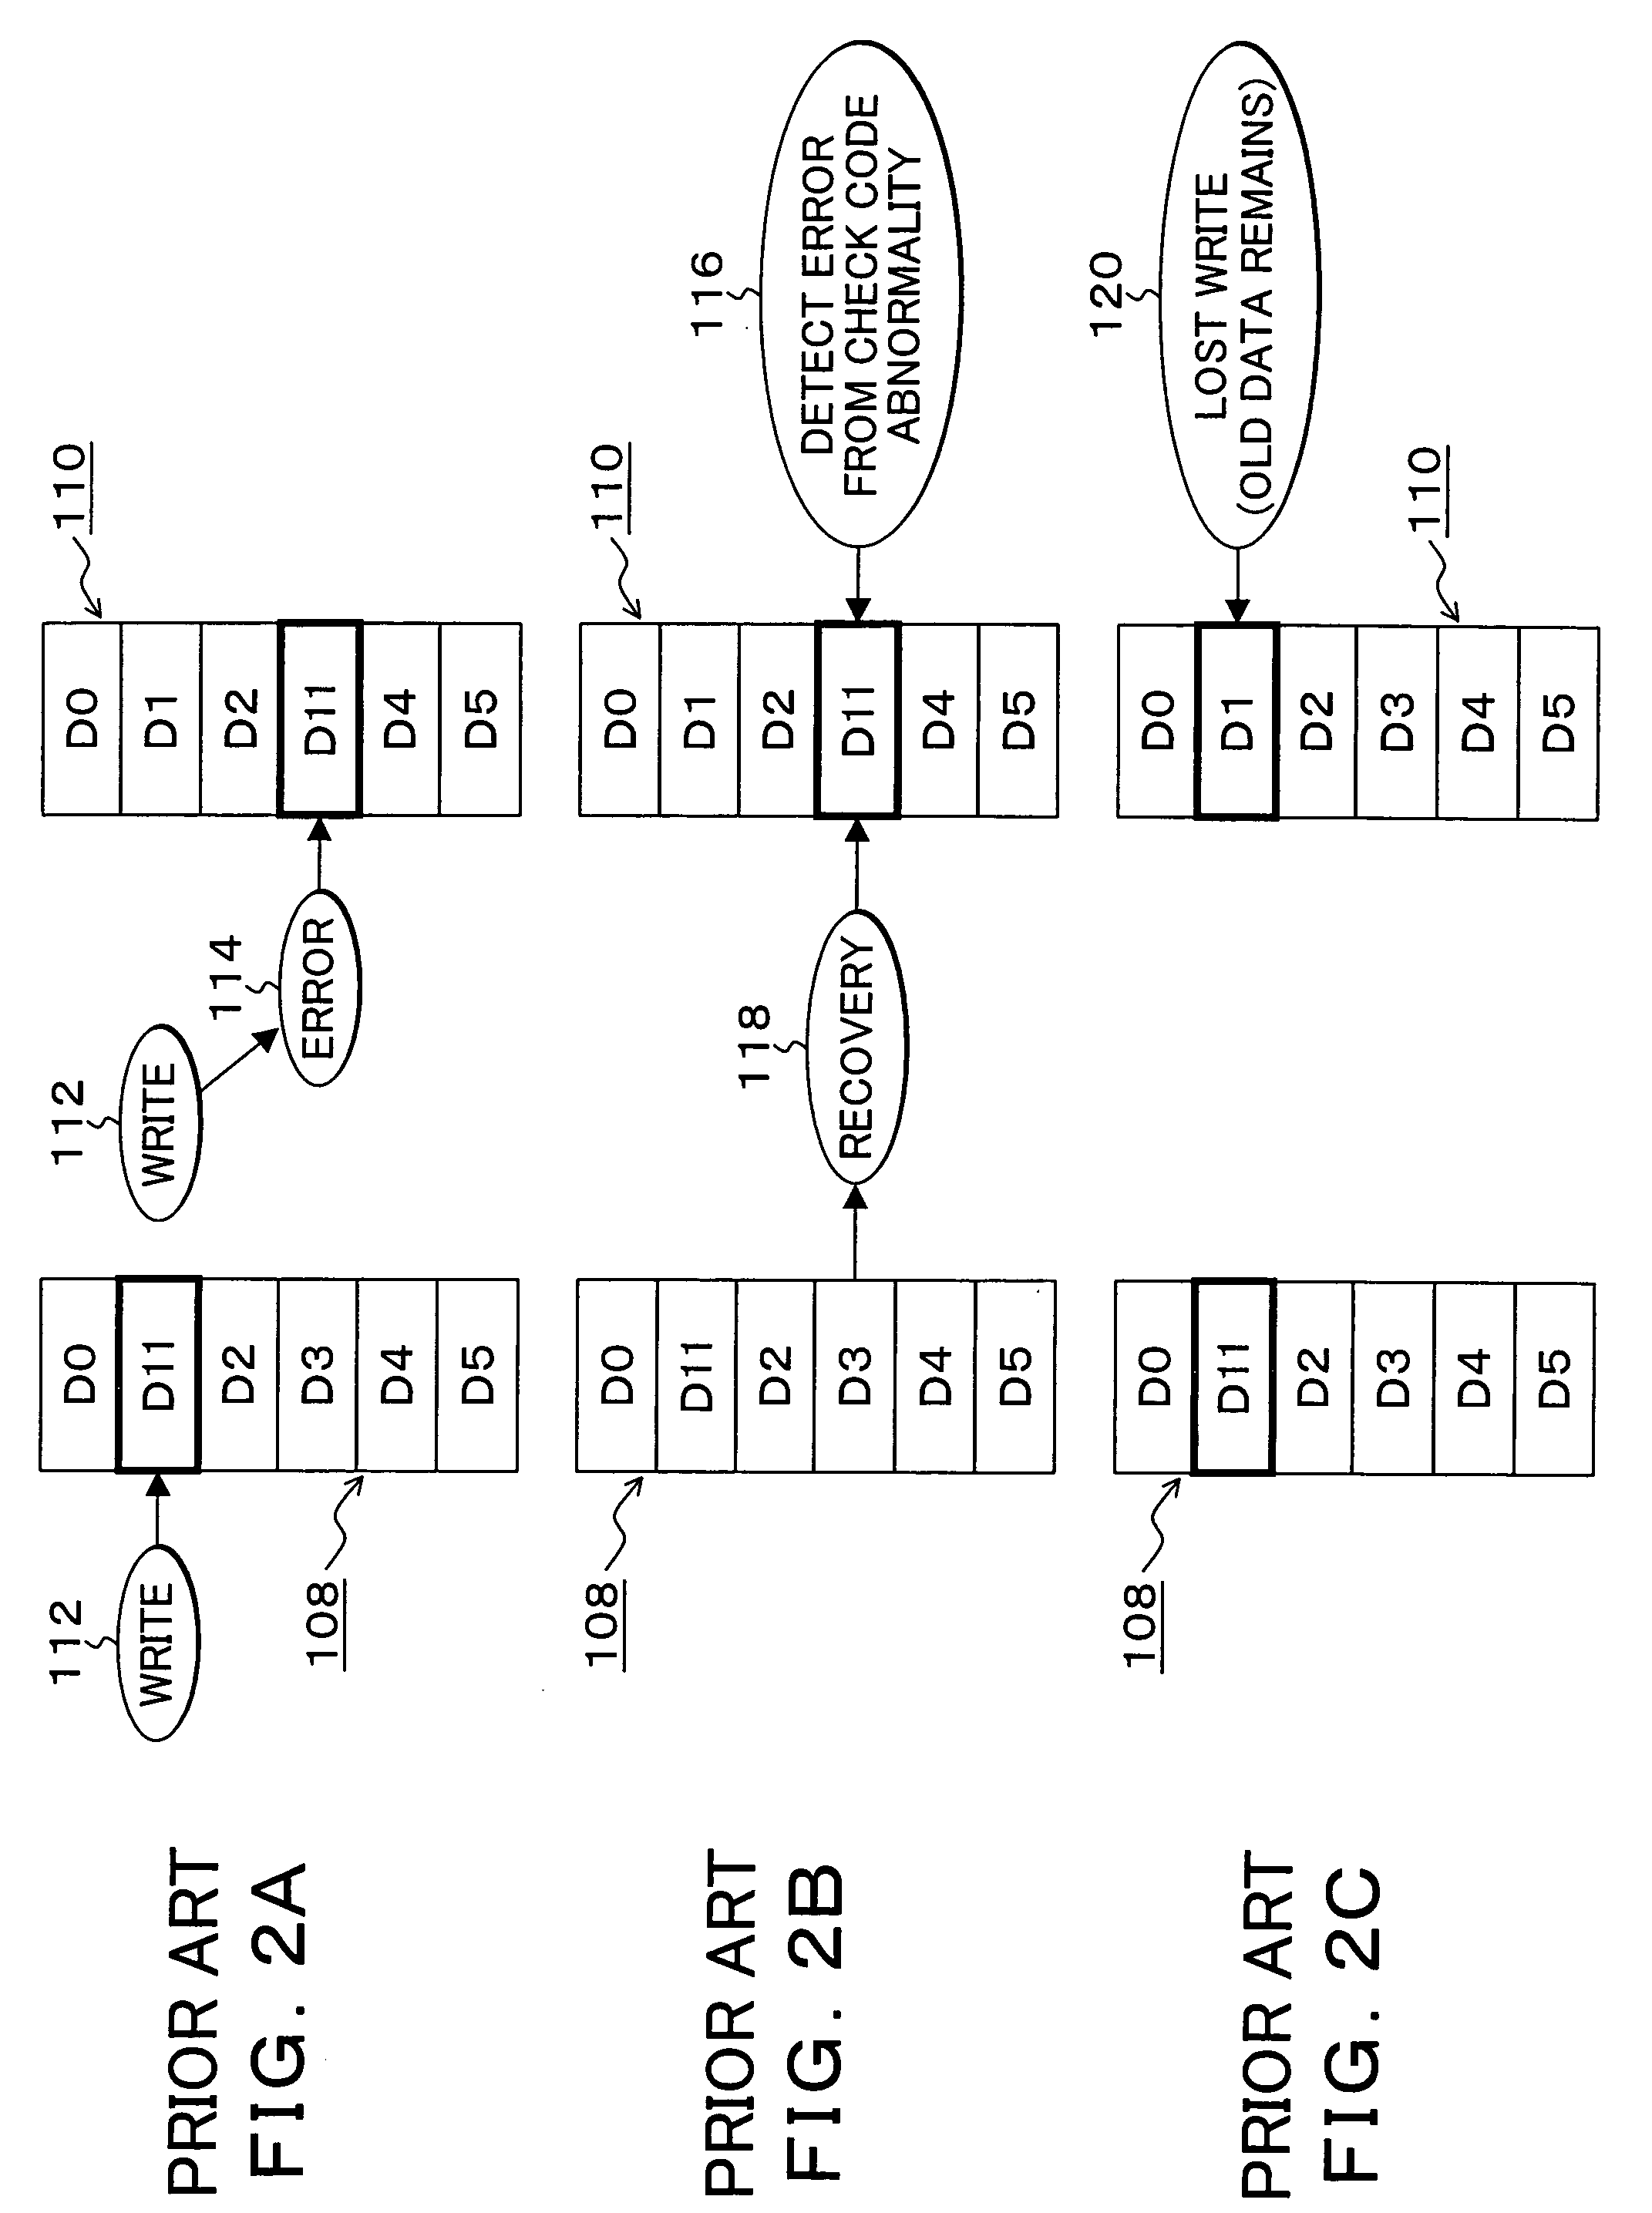 Program, method and apparatus for disk array control